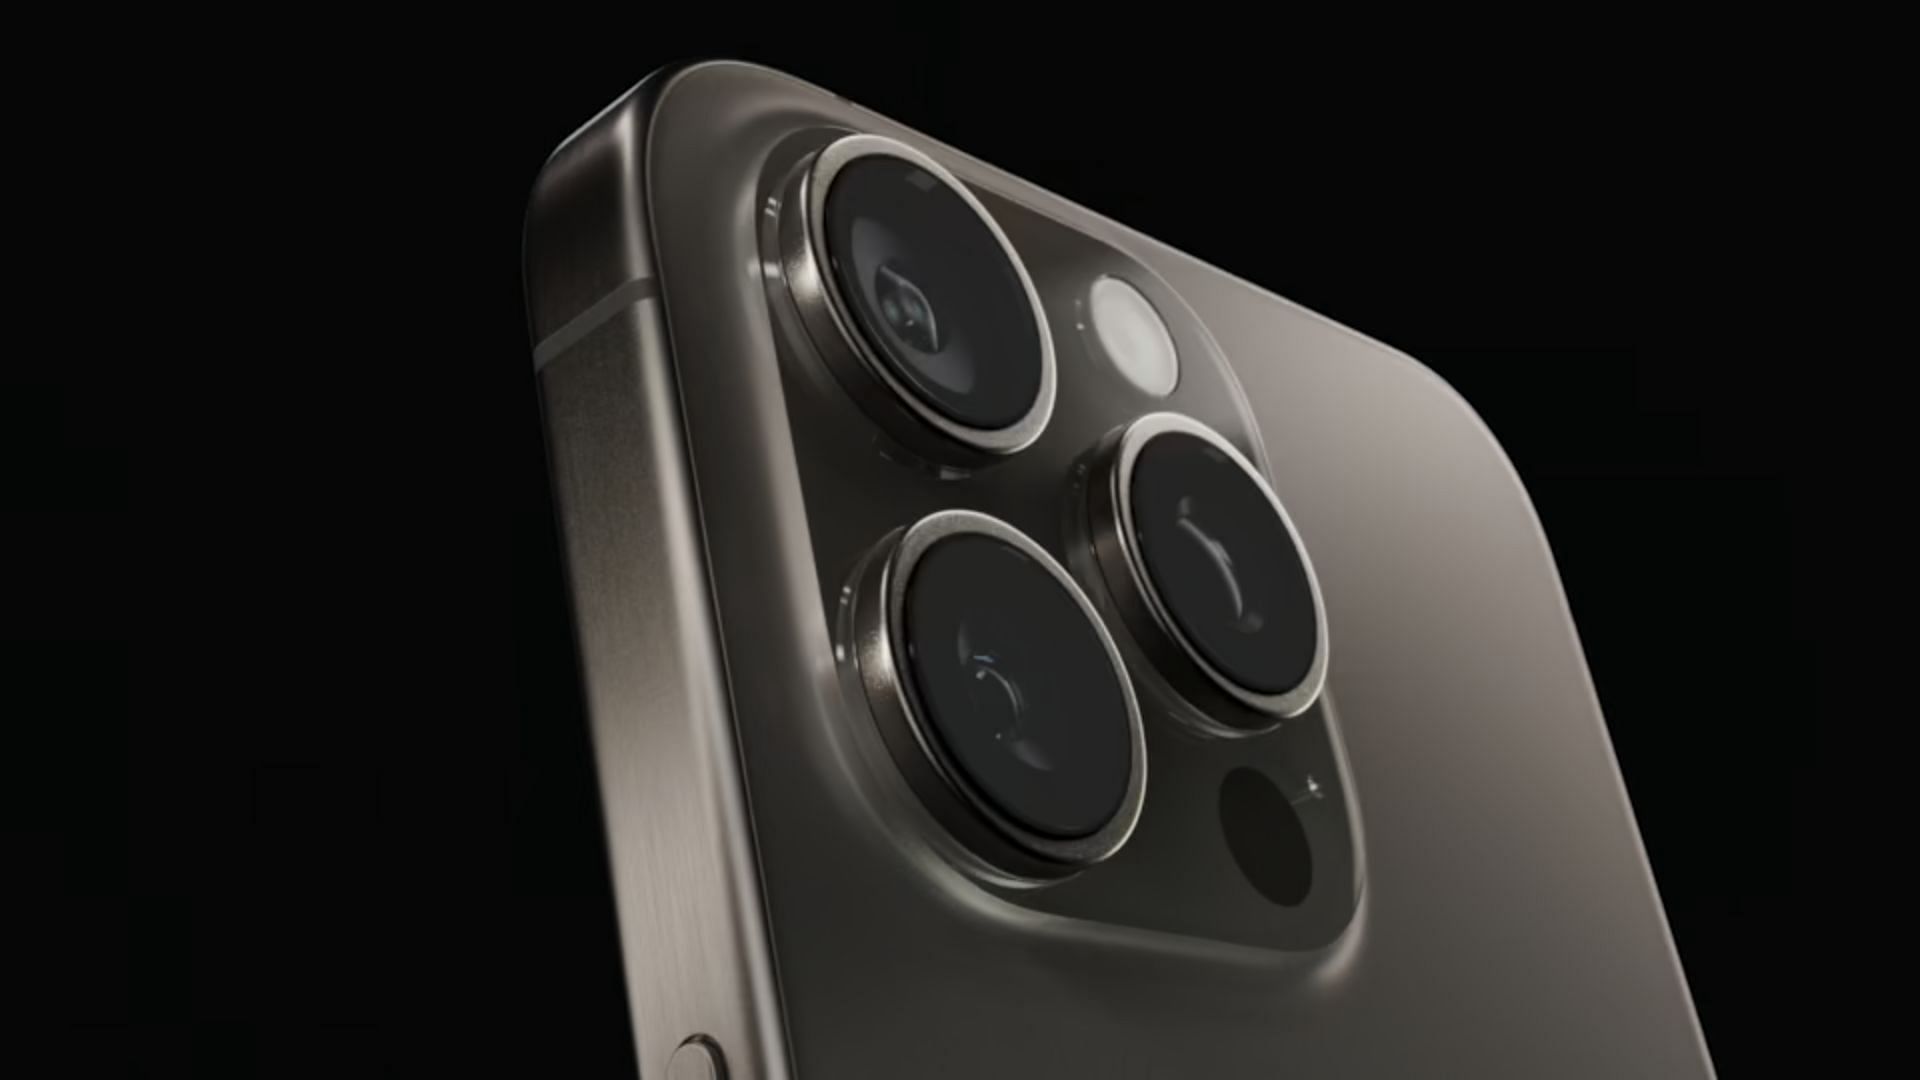 The 15 Pro is the most powerful iPhone Apple has ever made. (Image via Apple)